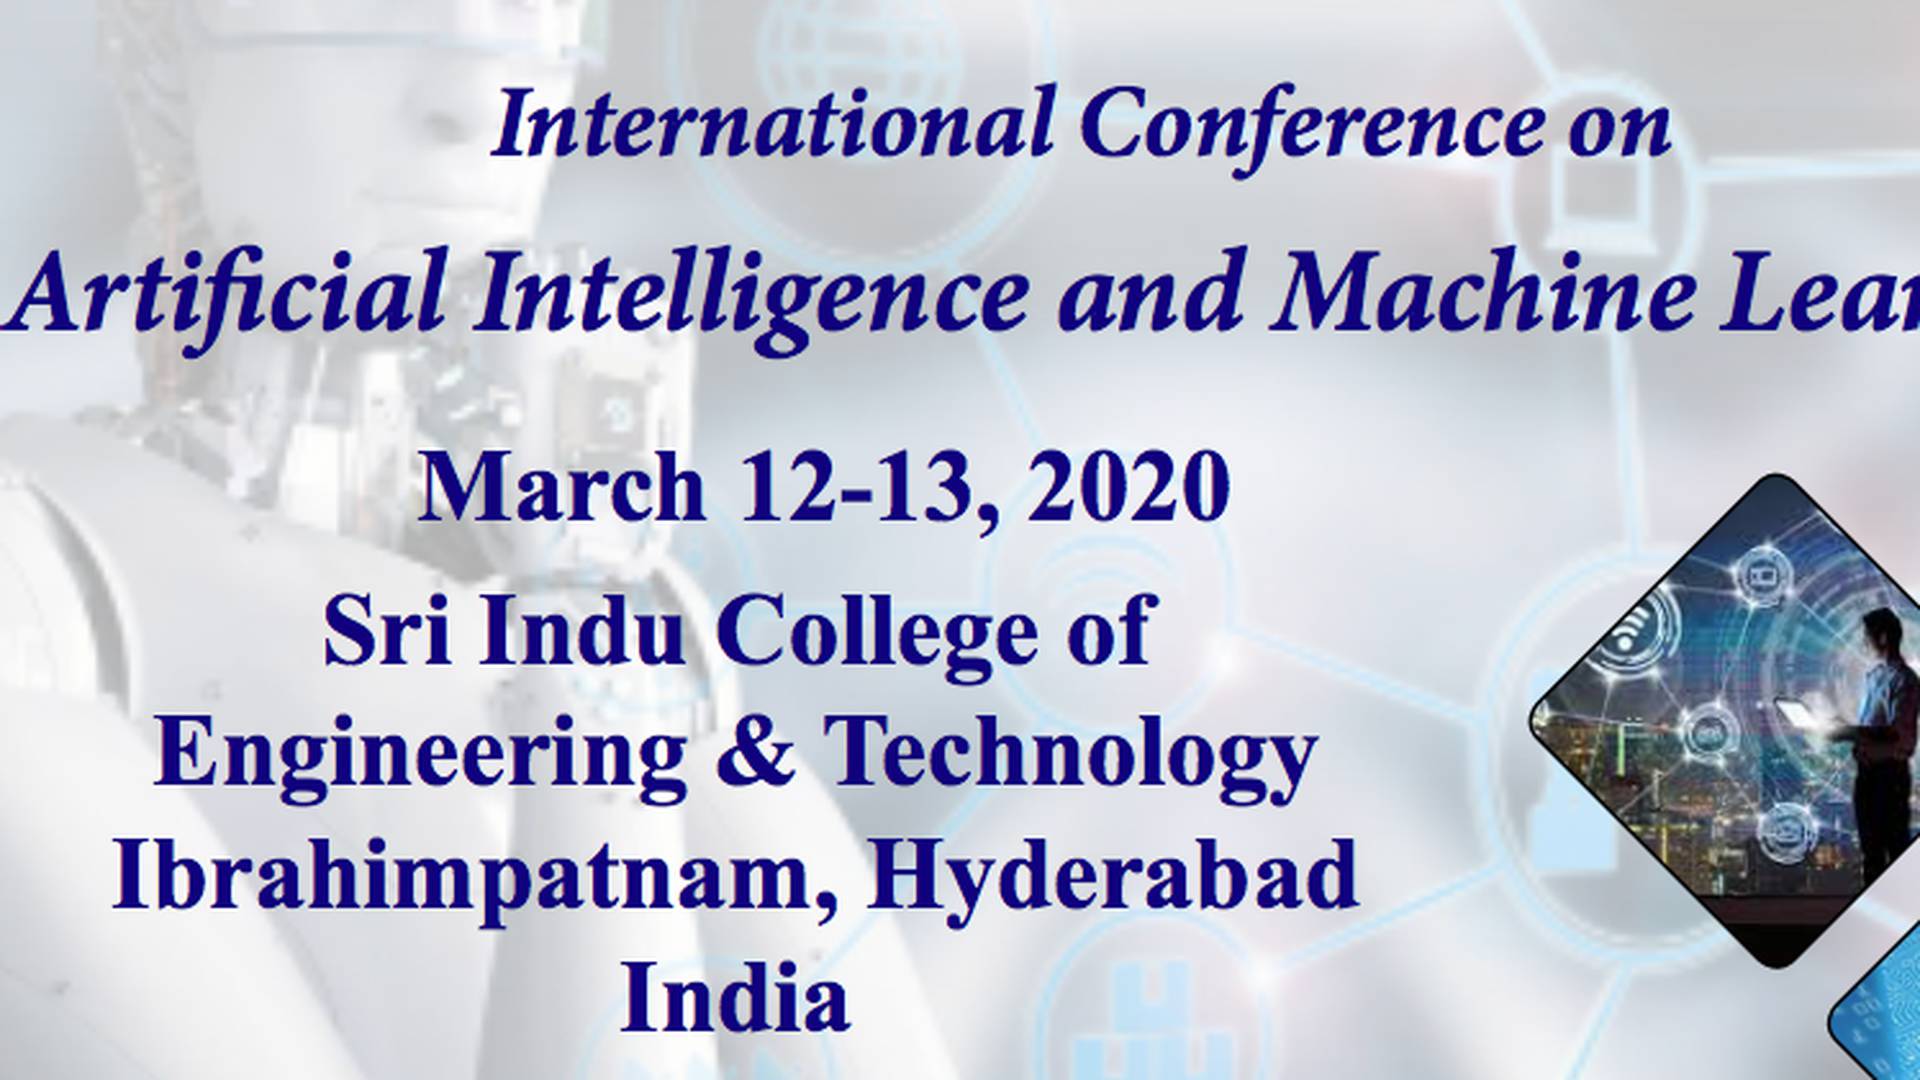 International Conference on Artificial Intelligence and Machine